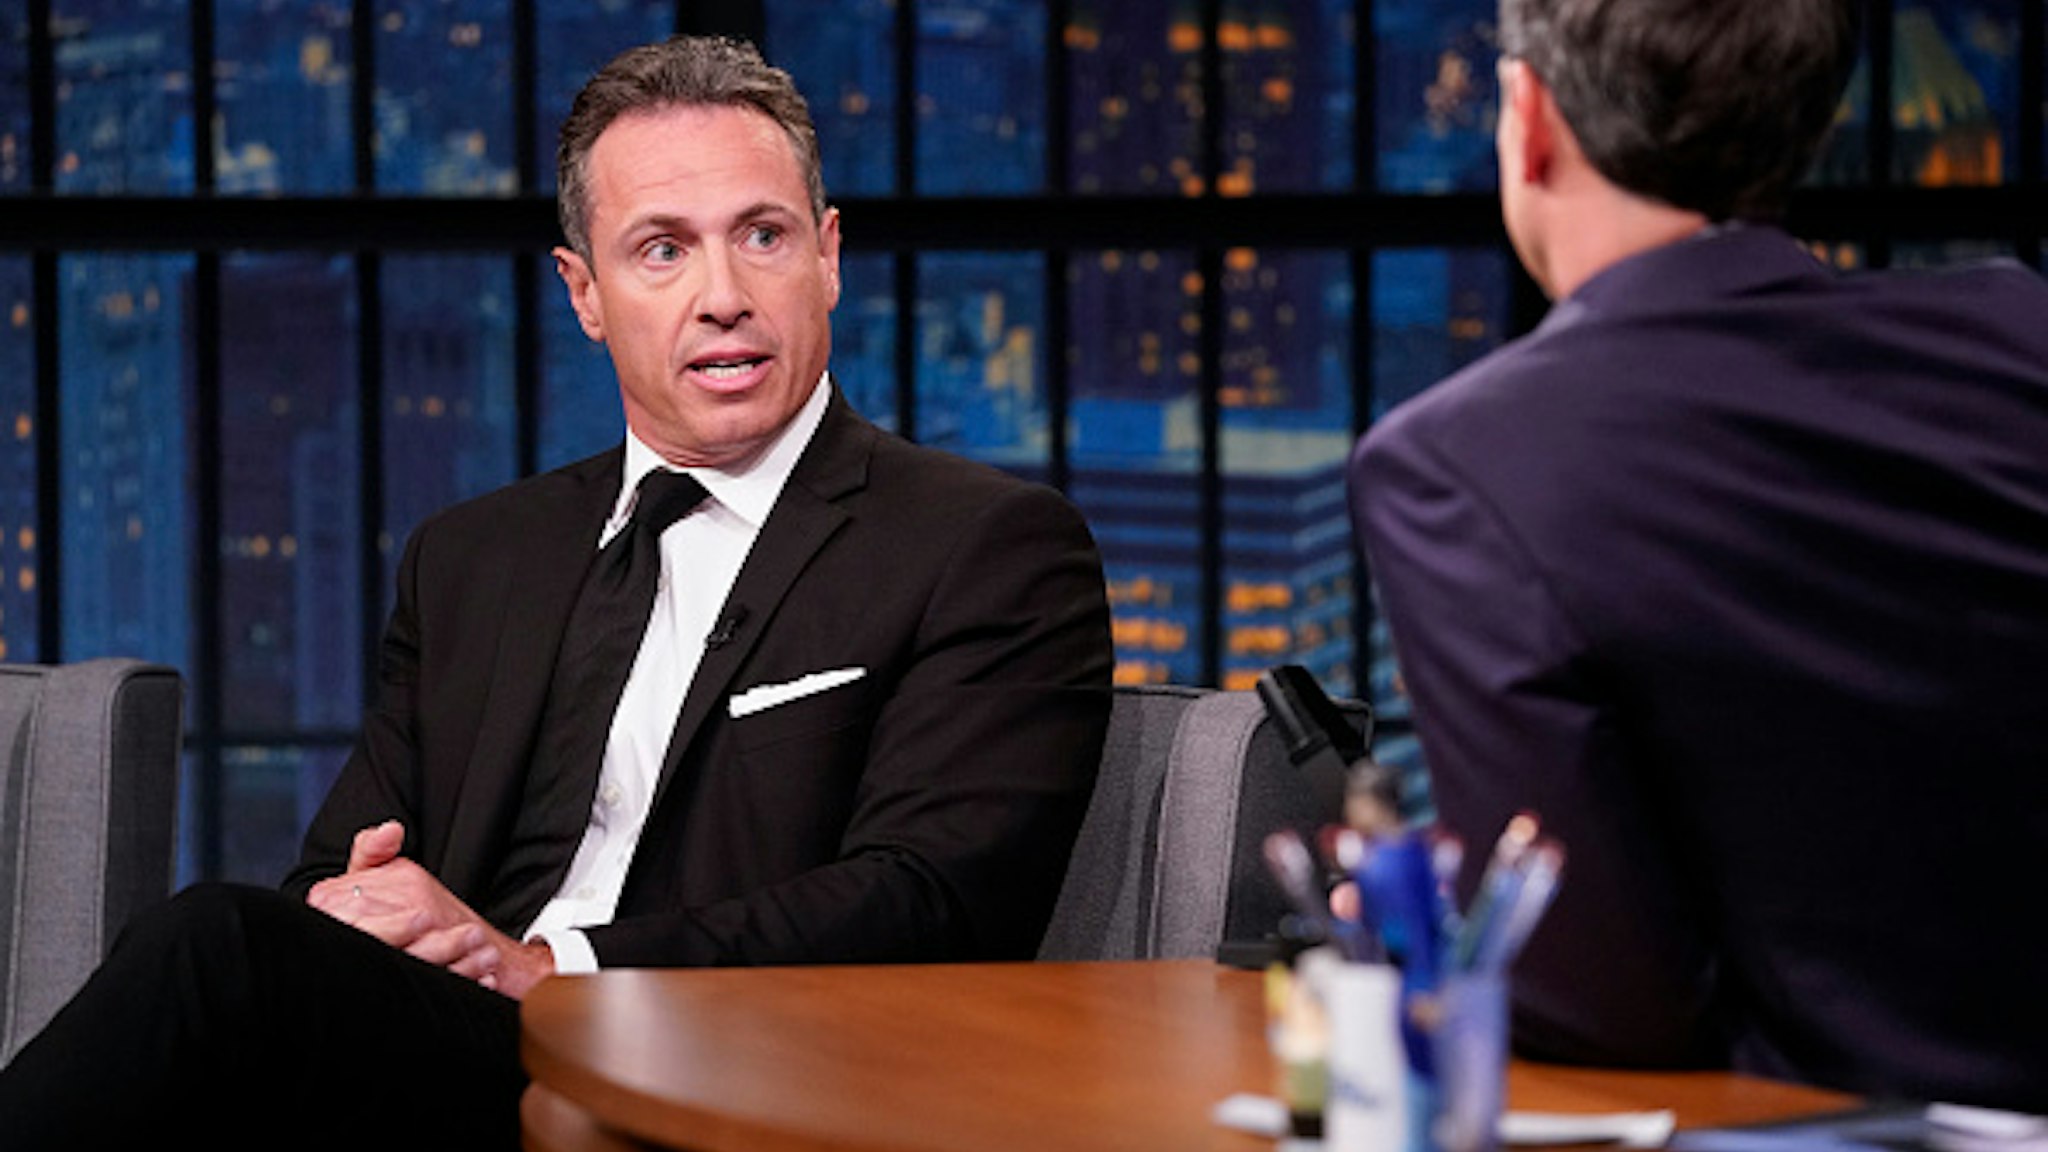 LATE NIGHT WITH SETH MEYERS -- Episode 867 -- Pictured: (l-r) CNN's Chris Cuomo during an interview with host Seth Meyers on August 1, 2019 --